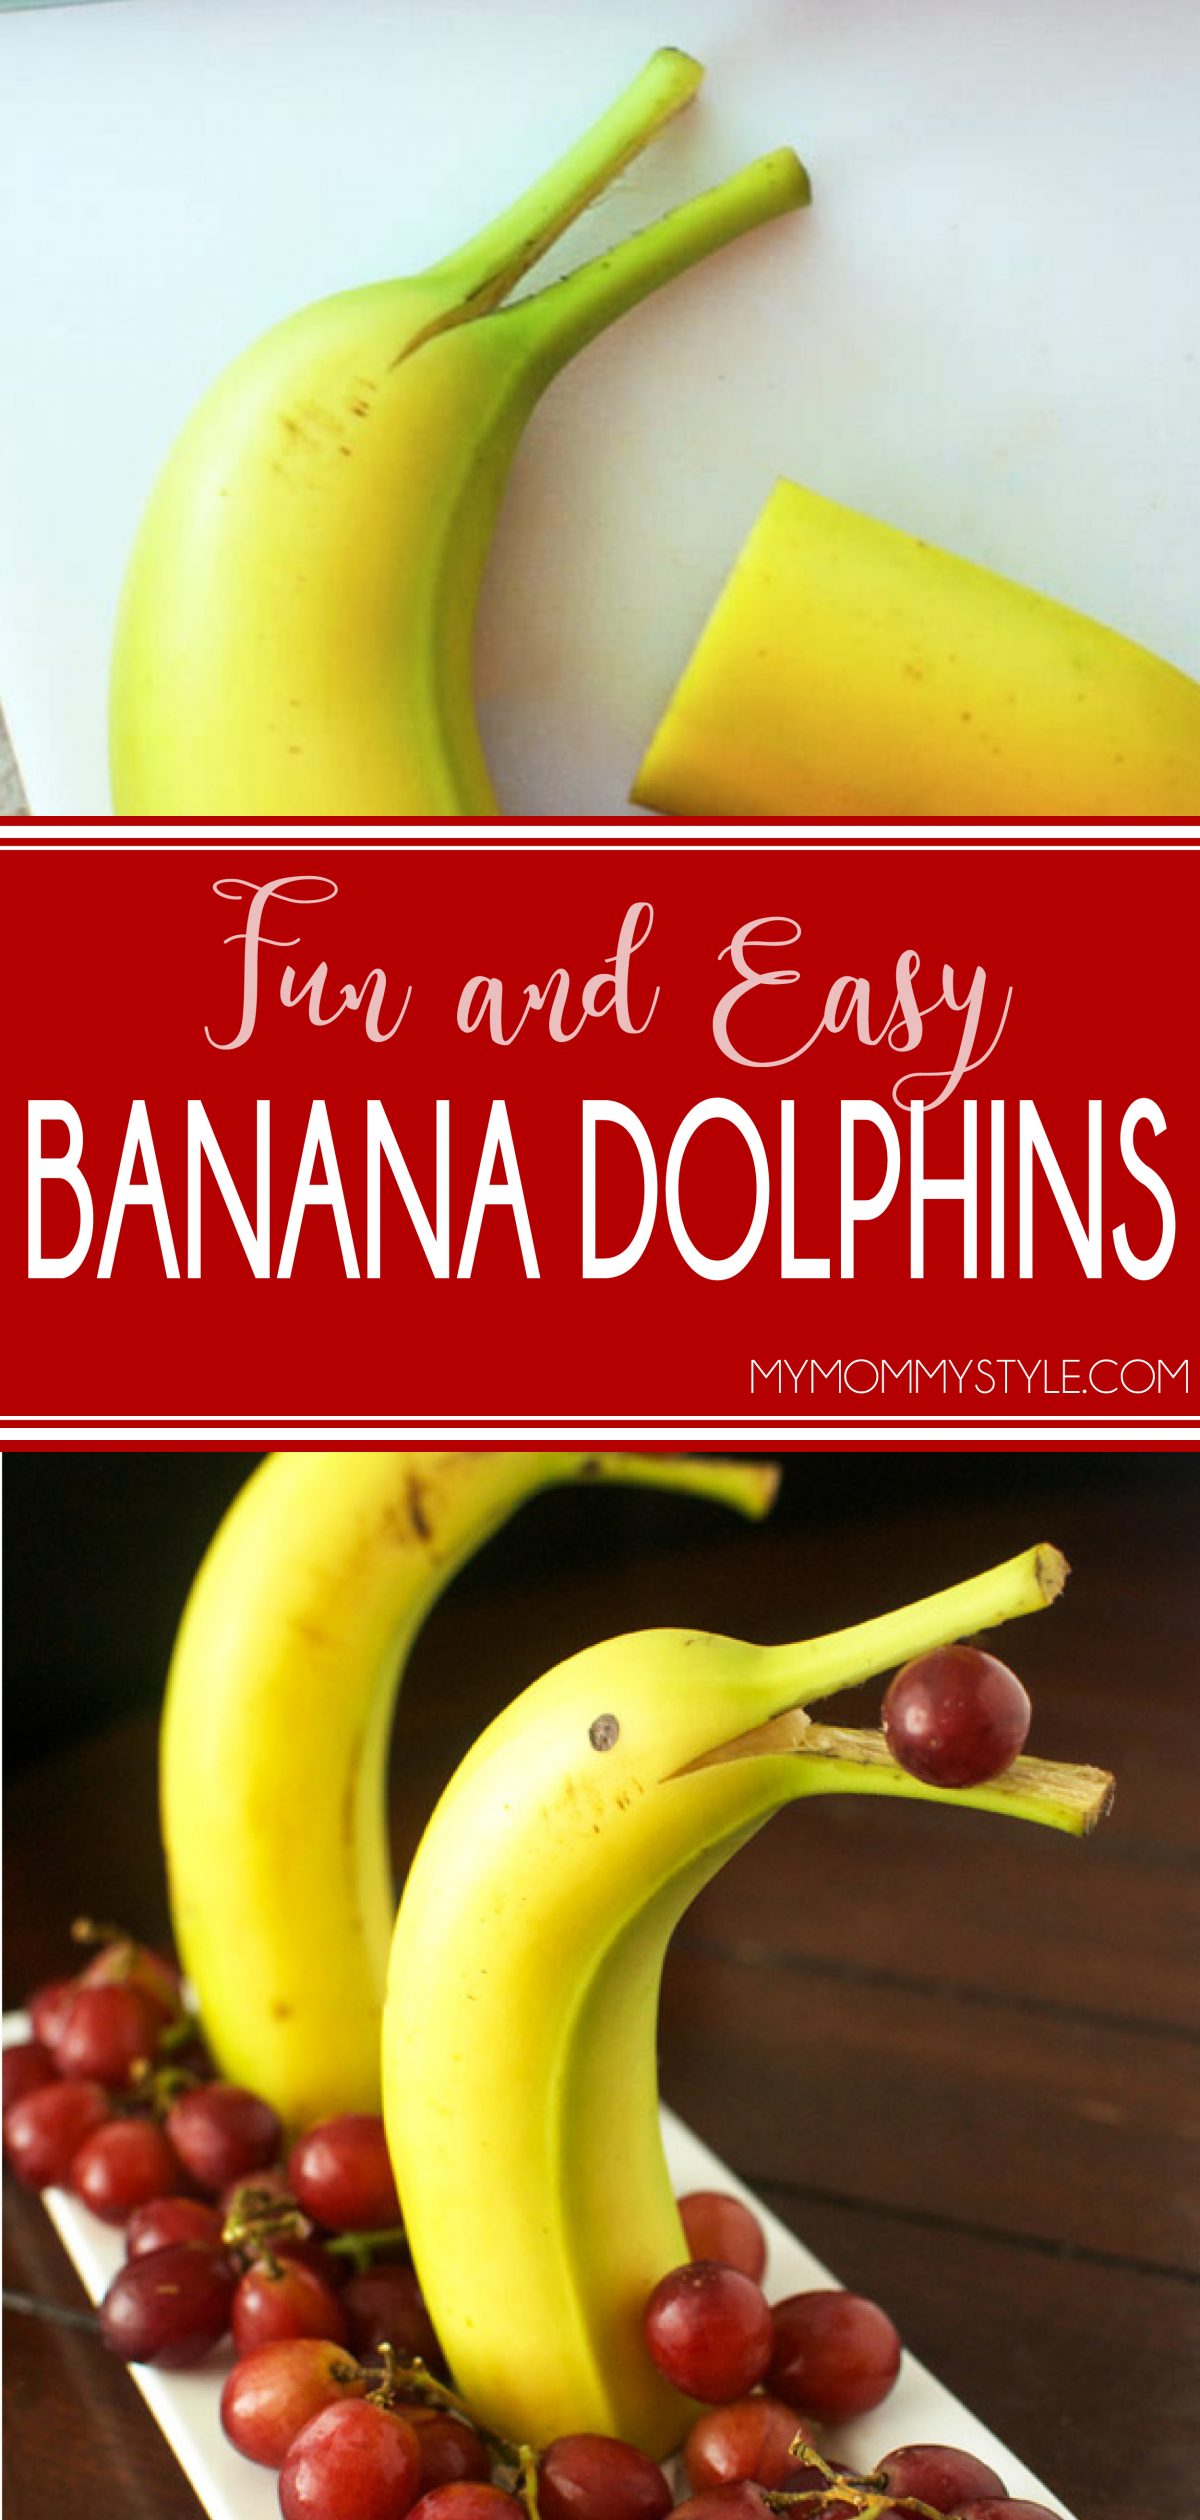 This is such a fun under the sea snack idea! And they're super easy to make. All you need is bananas, grapes, a sharp knife, and a sharpie and you're good to go! via @mymommystyle